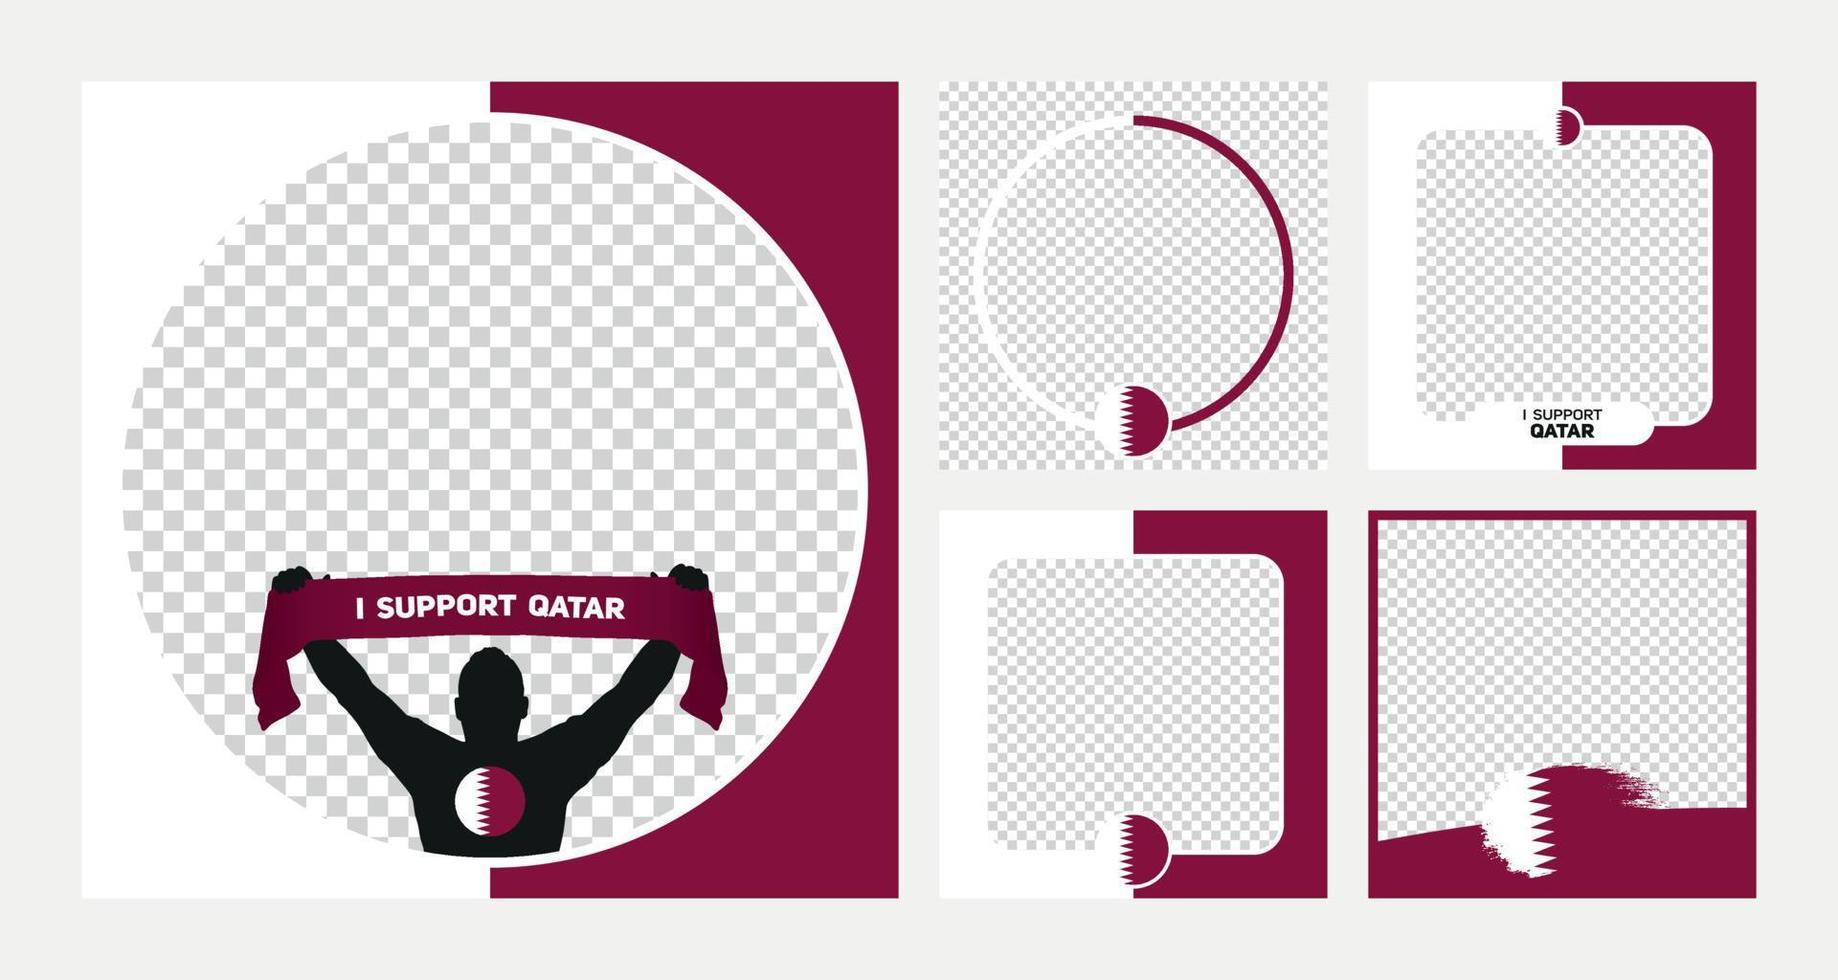 I support Qatar world football championship profil picture frame banners for social media vector